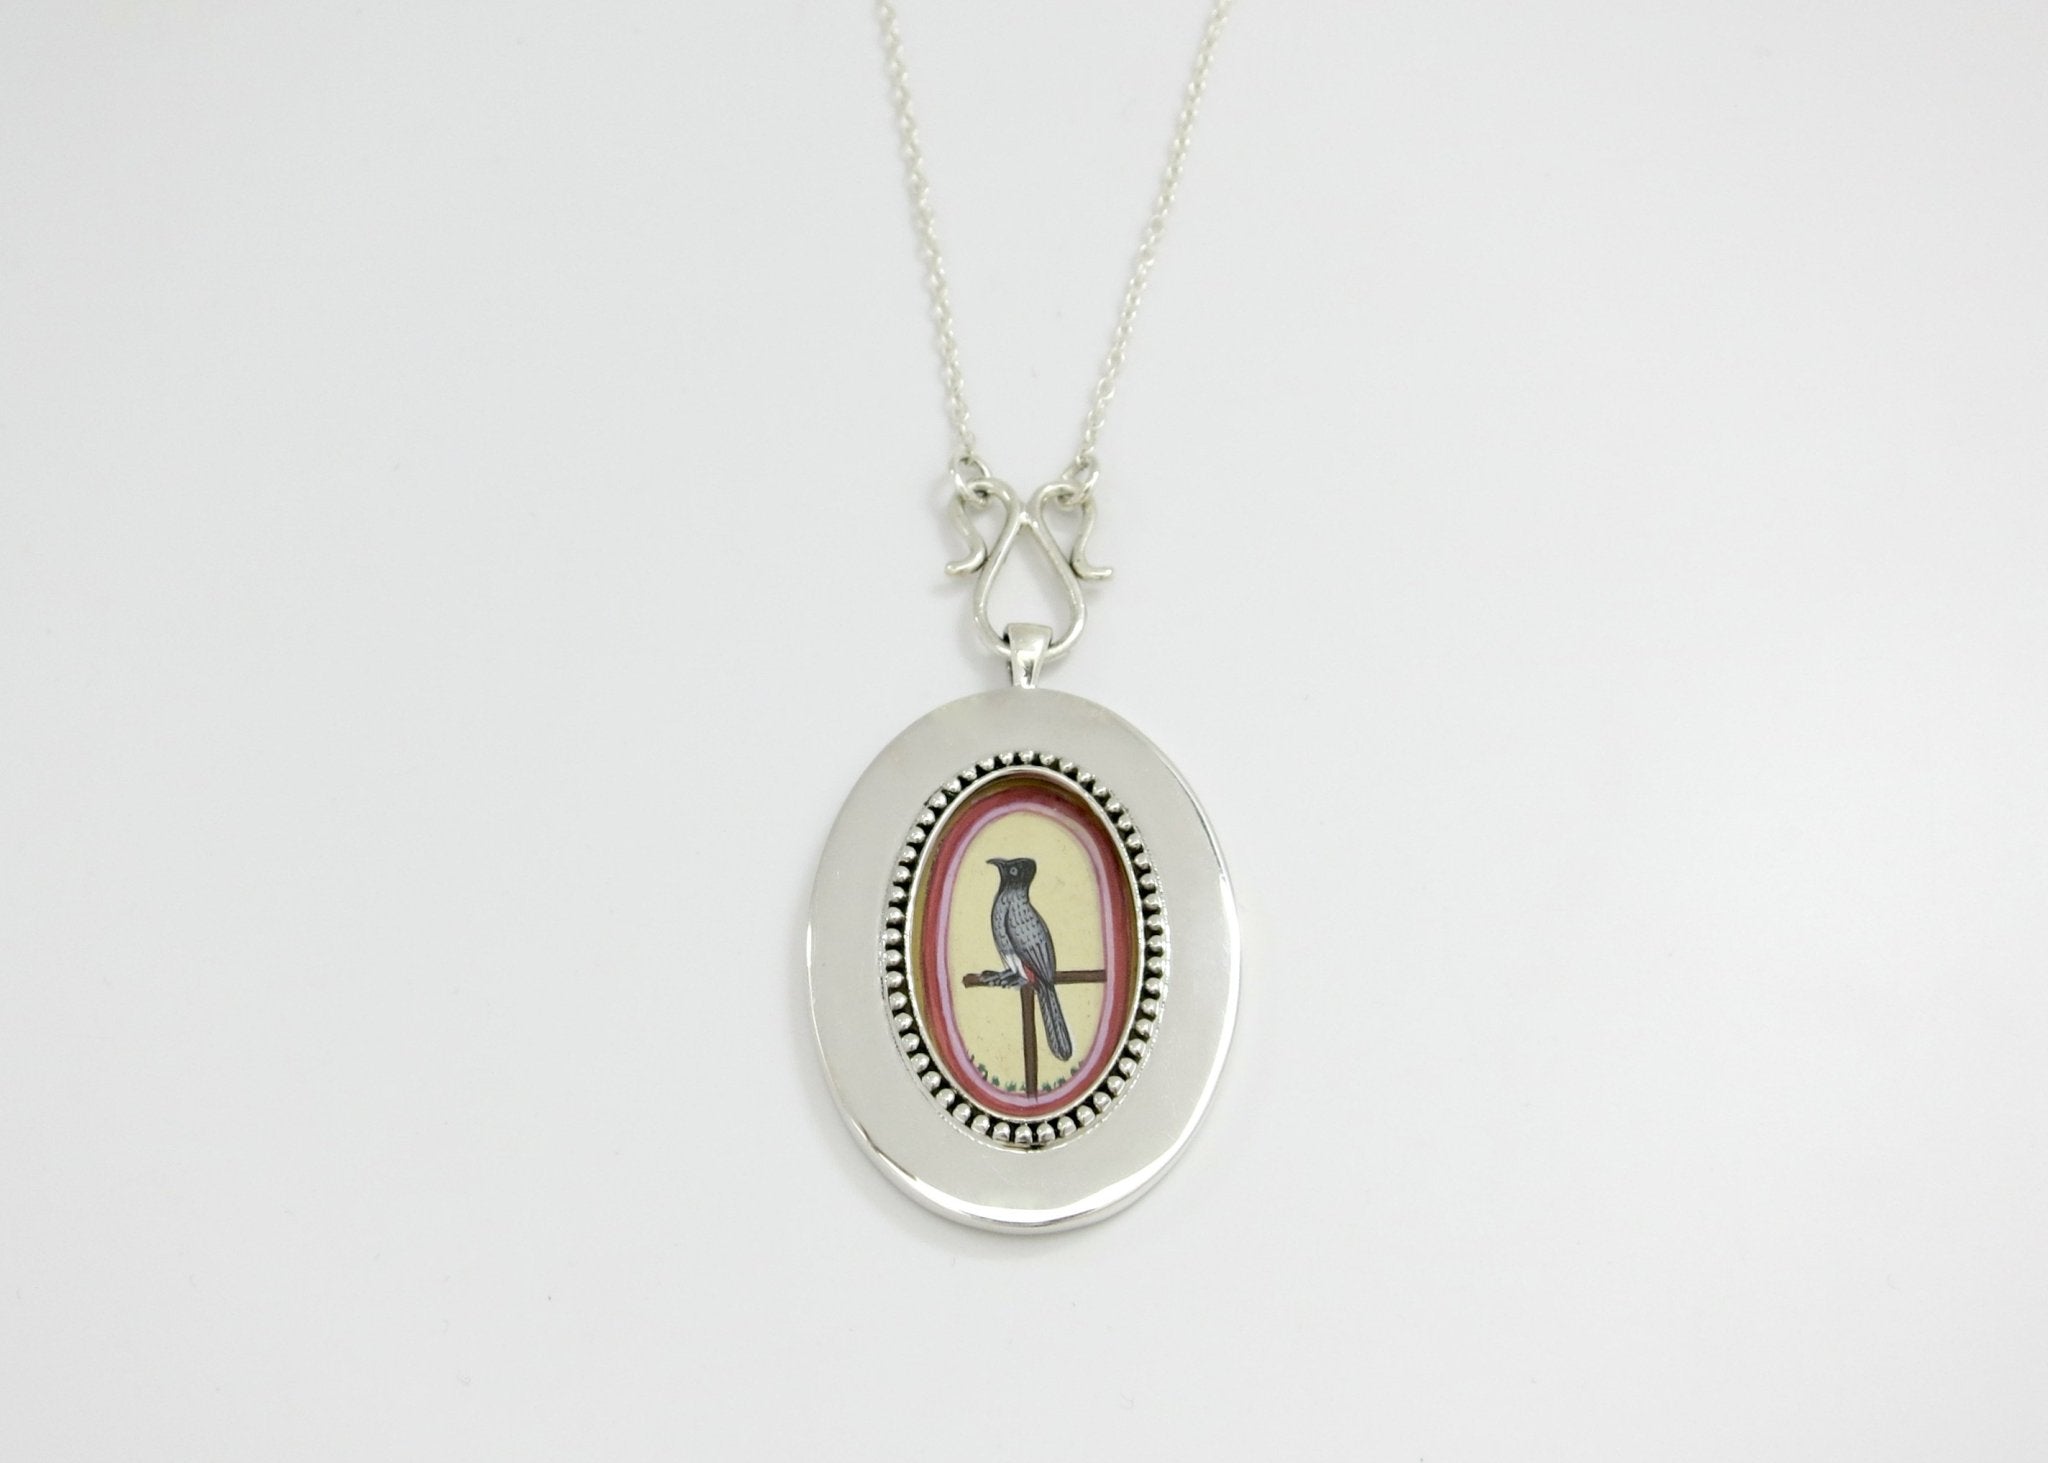 Timeless, elegant, and artistic Koel (bird) necklace - Lai